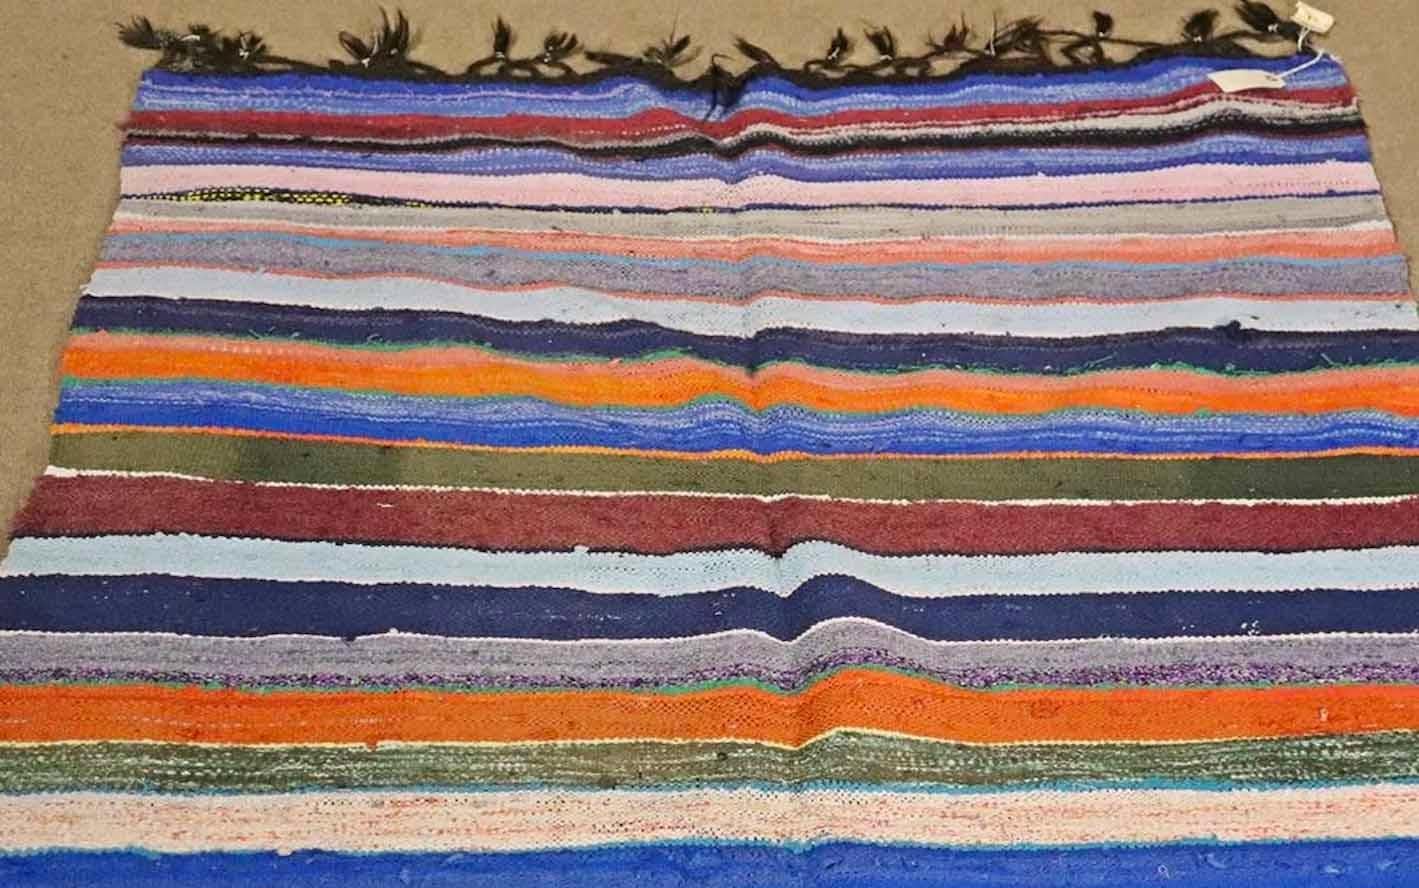 Handwoven multicolored rug measuring over 8 feet long.
Please confirm location.